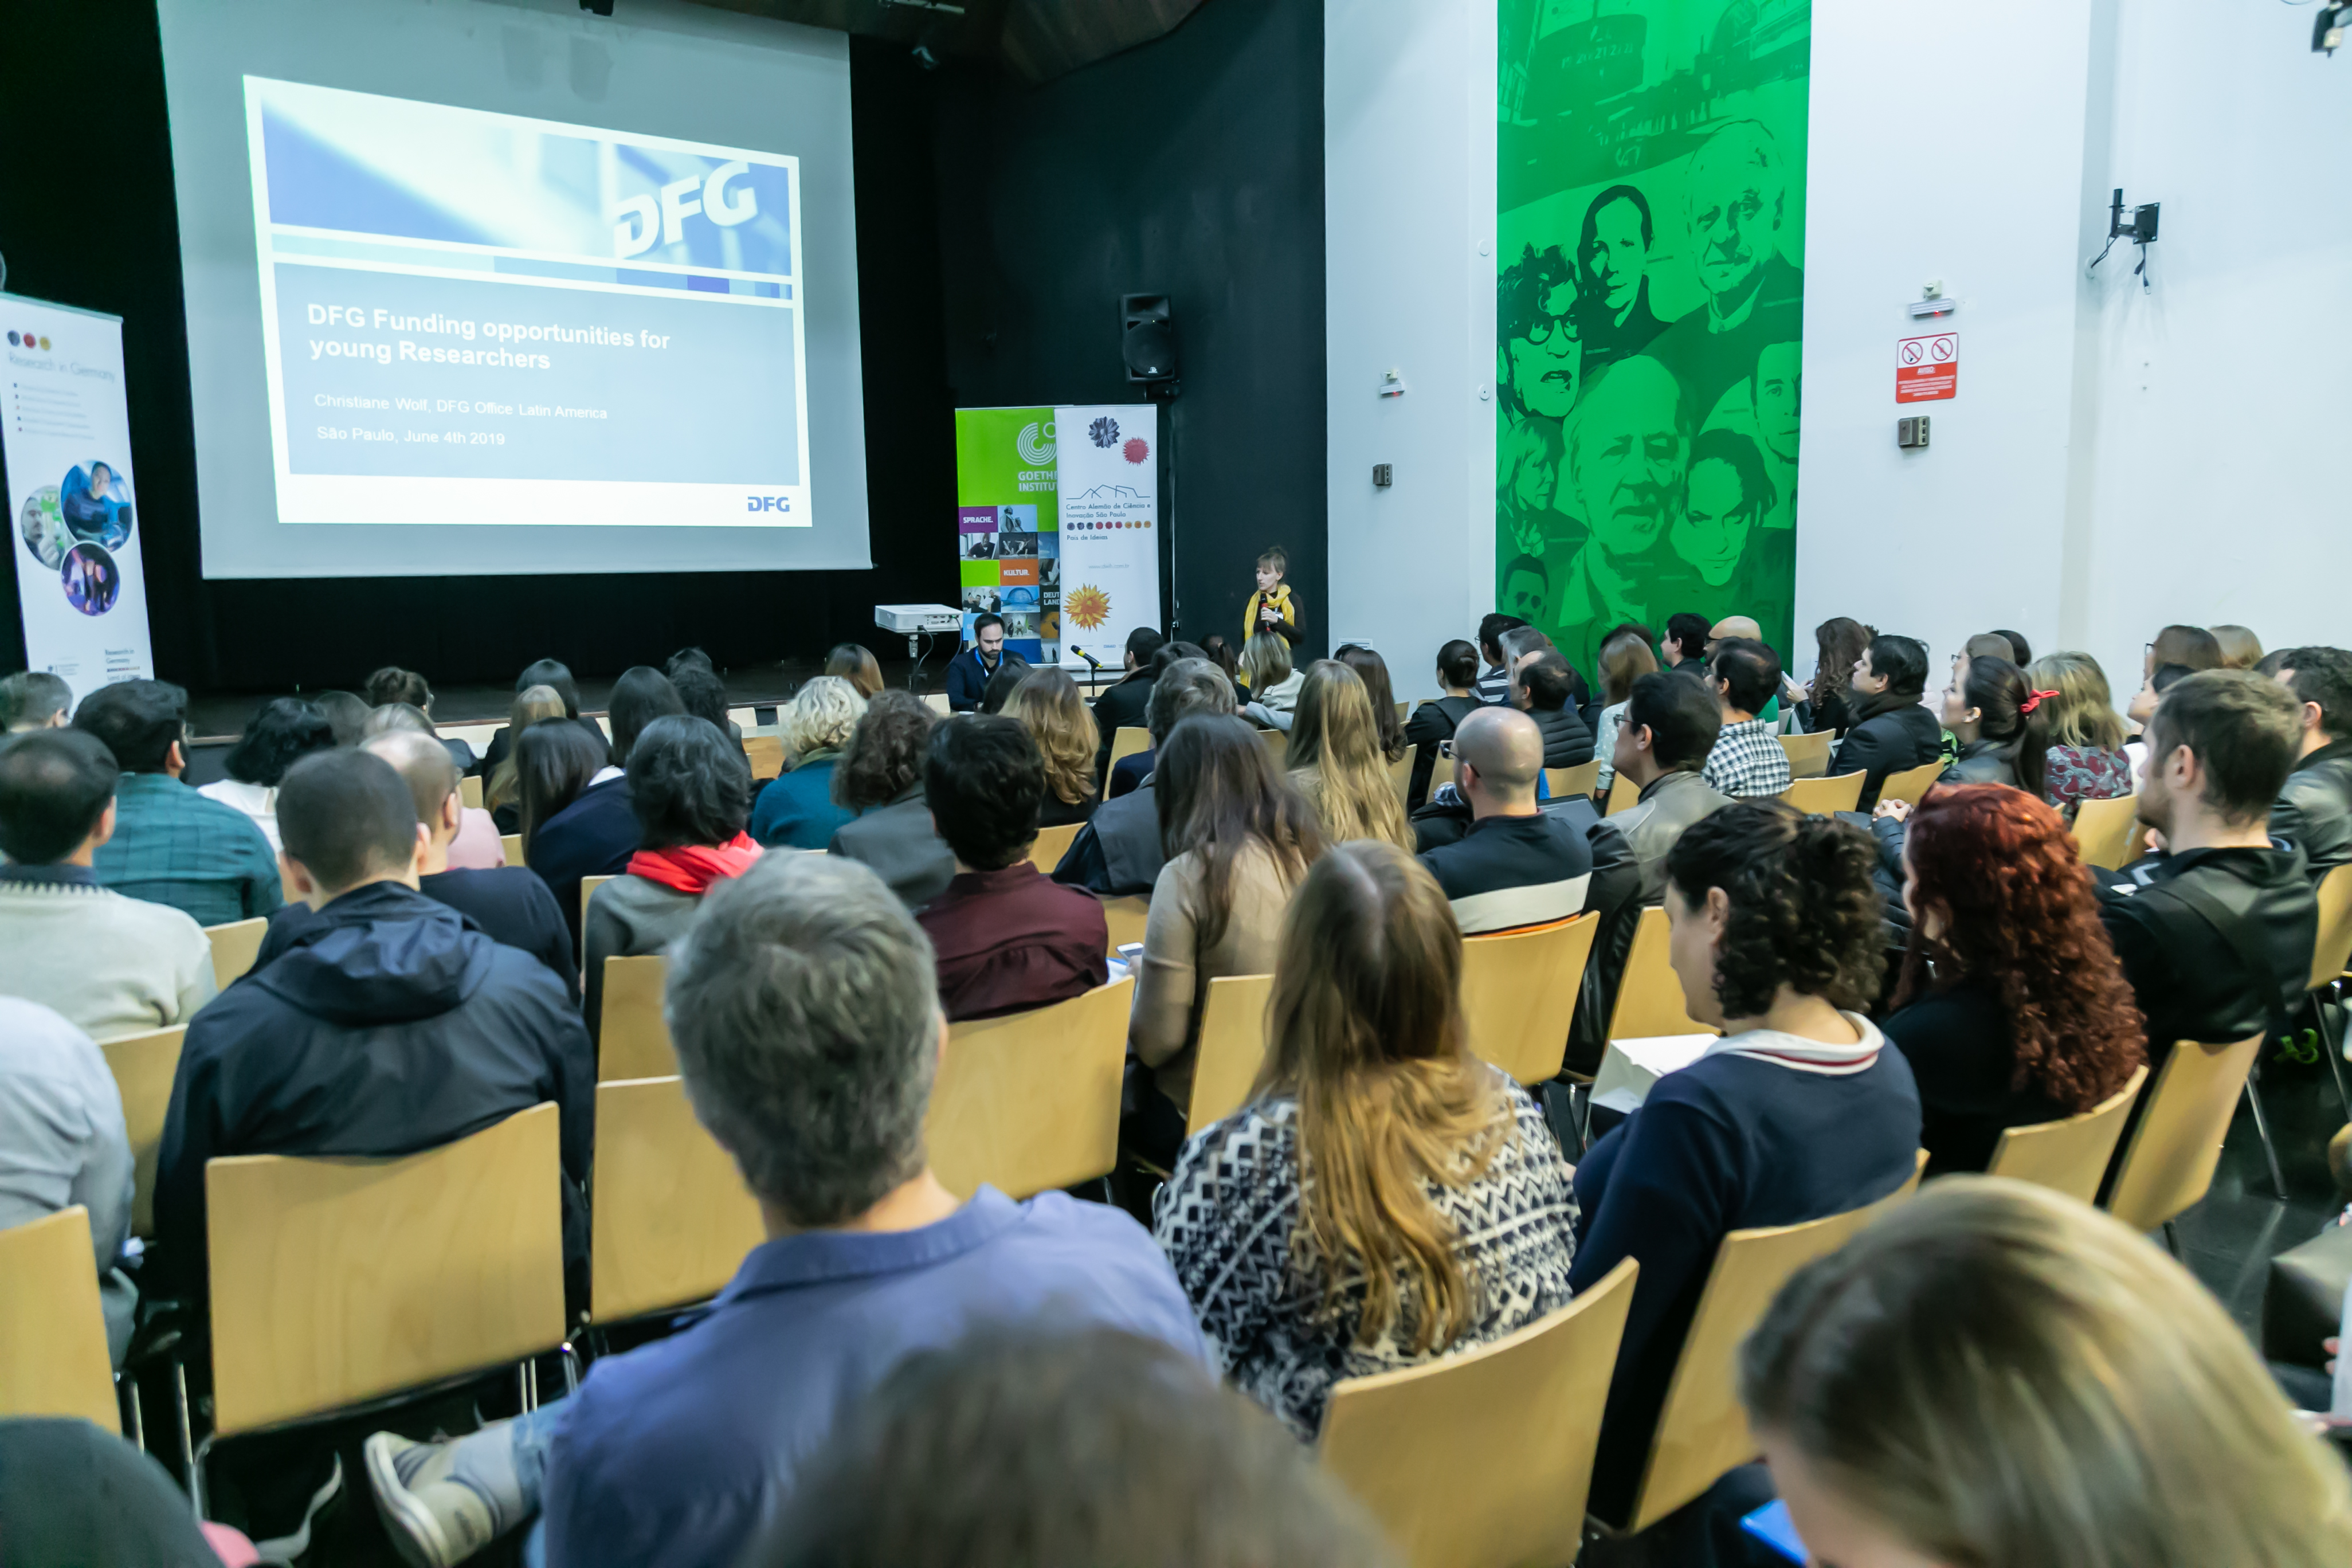 A total of around 200 researchers took part in the two postdoctoral workshops